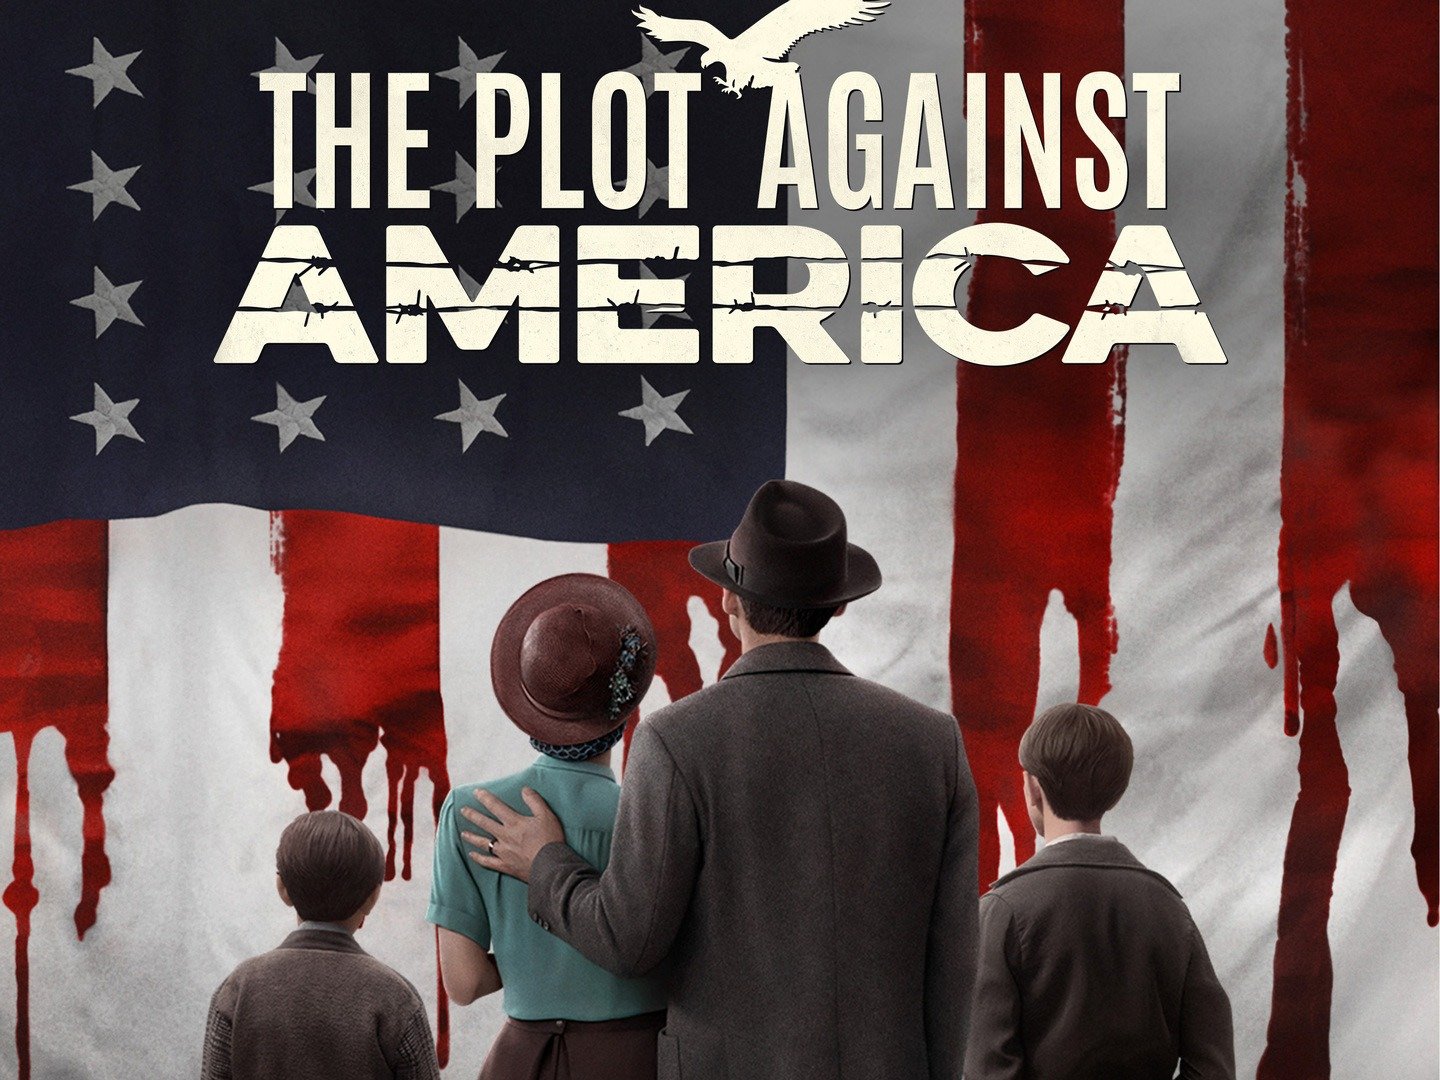 Book Review: “A Plot Against America”